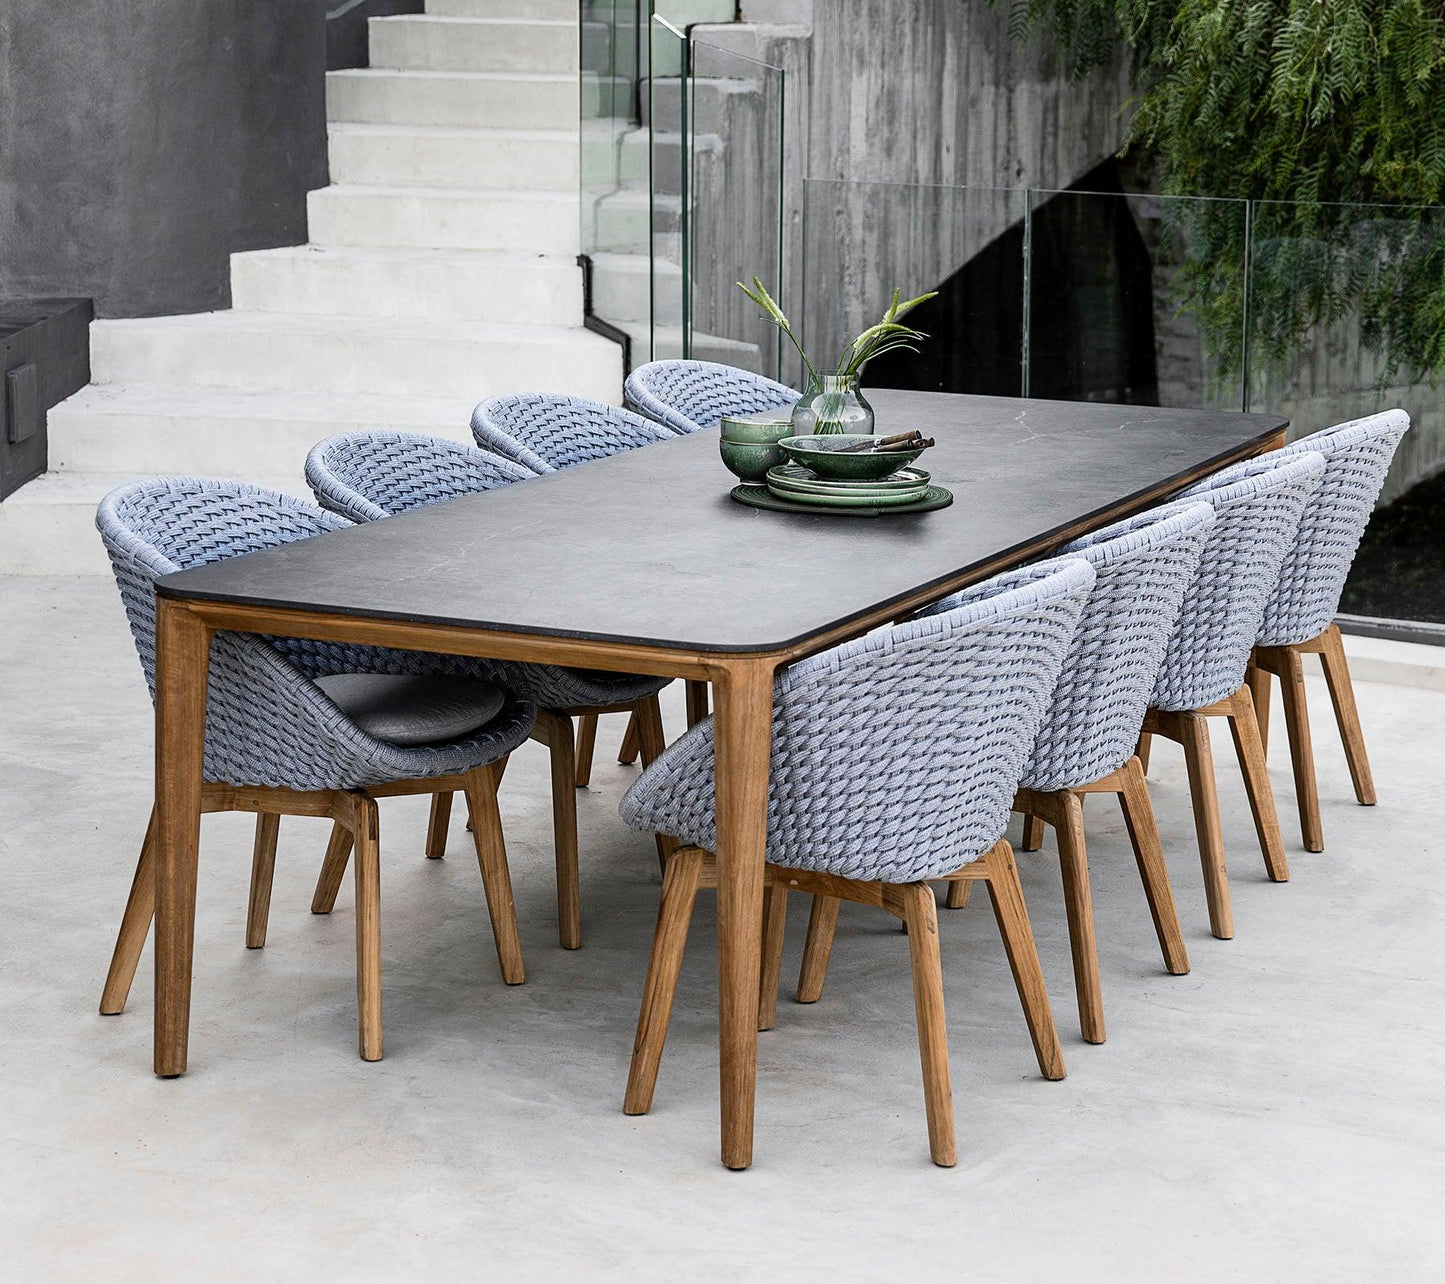 Cane-Line Aspect Dining Set with Peacock Chairs - Garden House Design